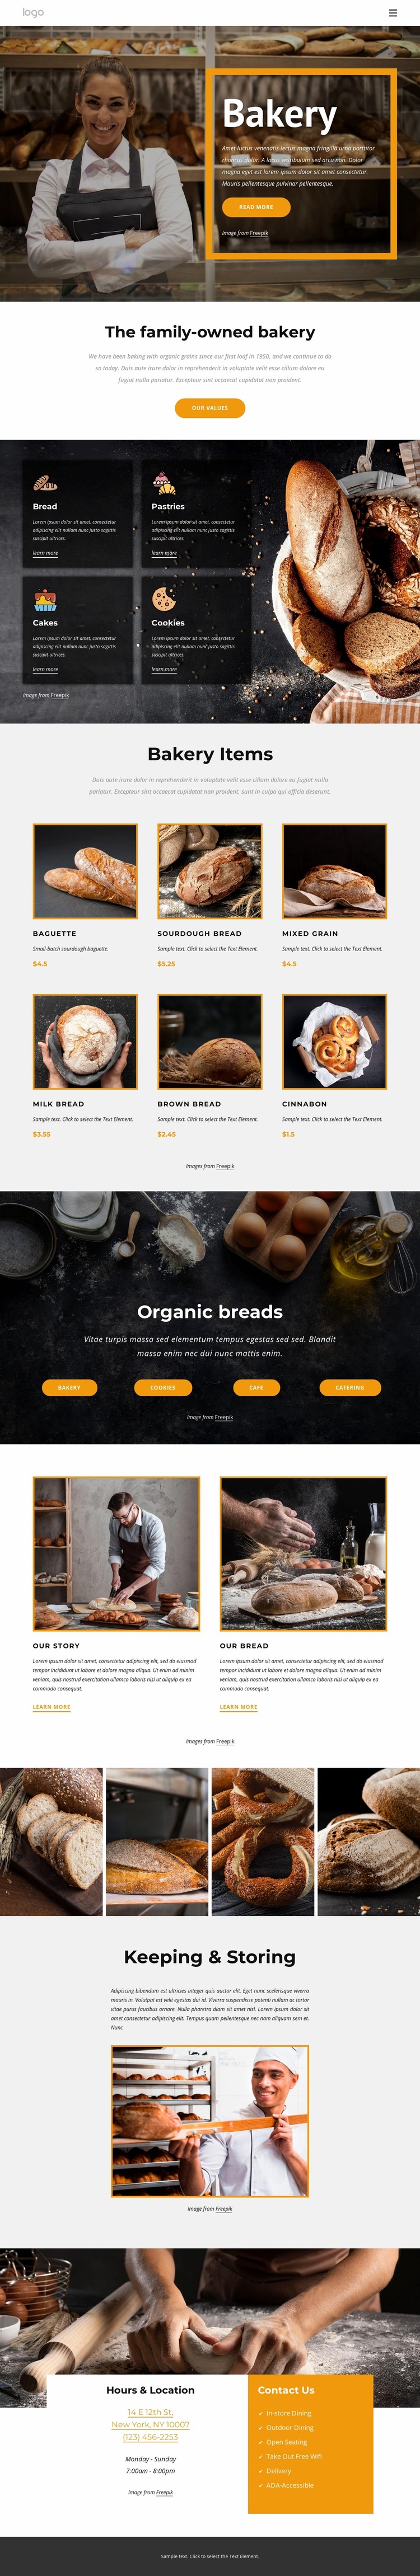 The family-owned bakery Website Builder Templates